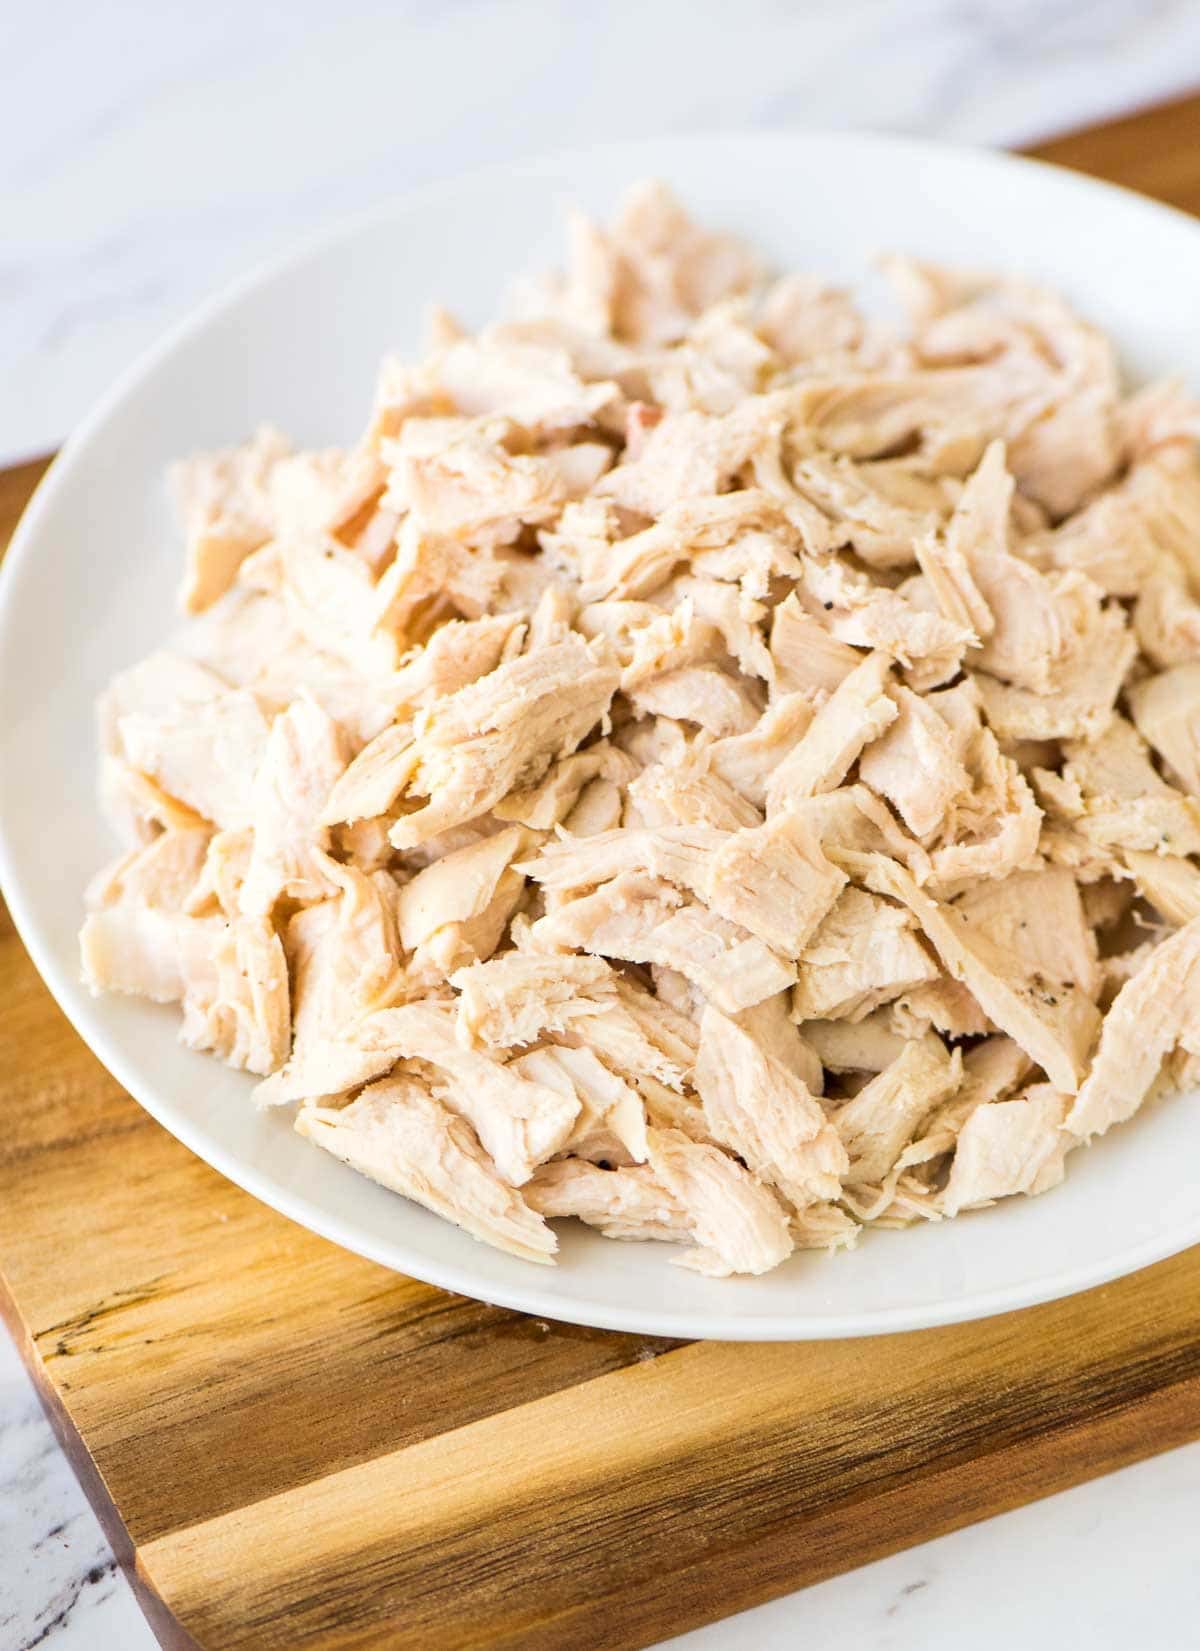 How to Make Shredded Chicken and Diced Chicken | Well Plated by Erin